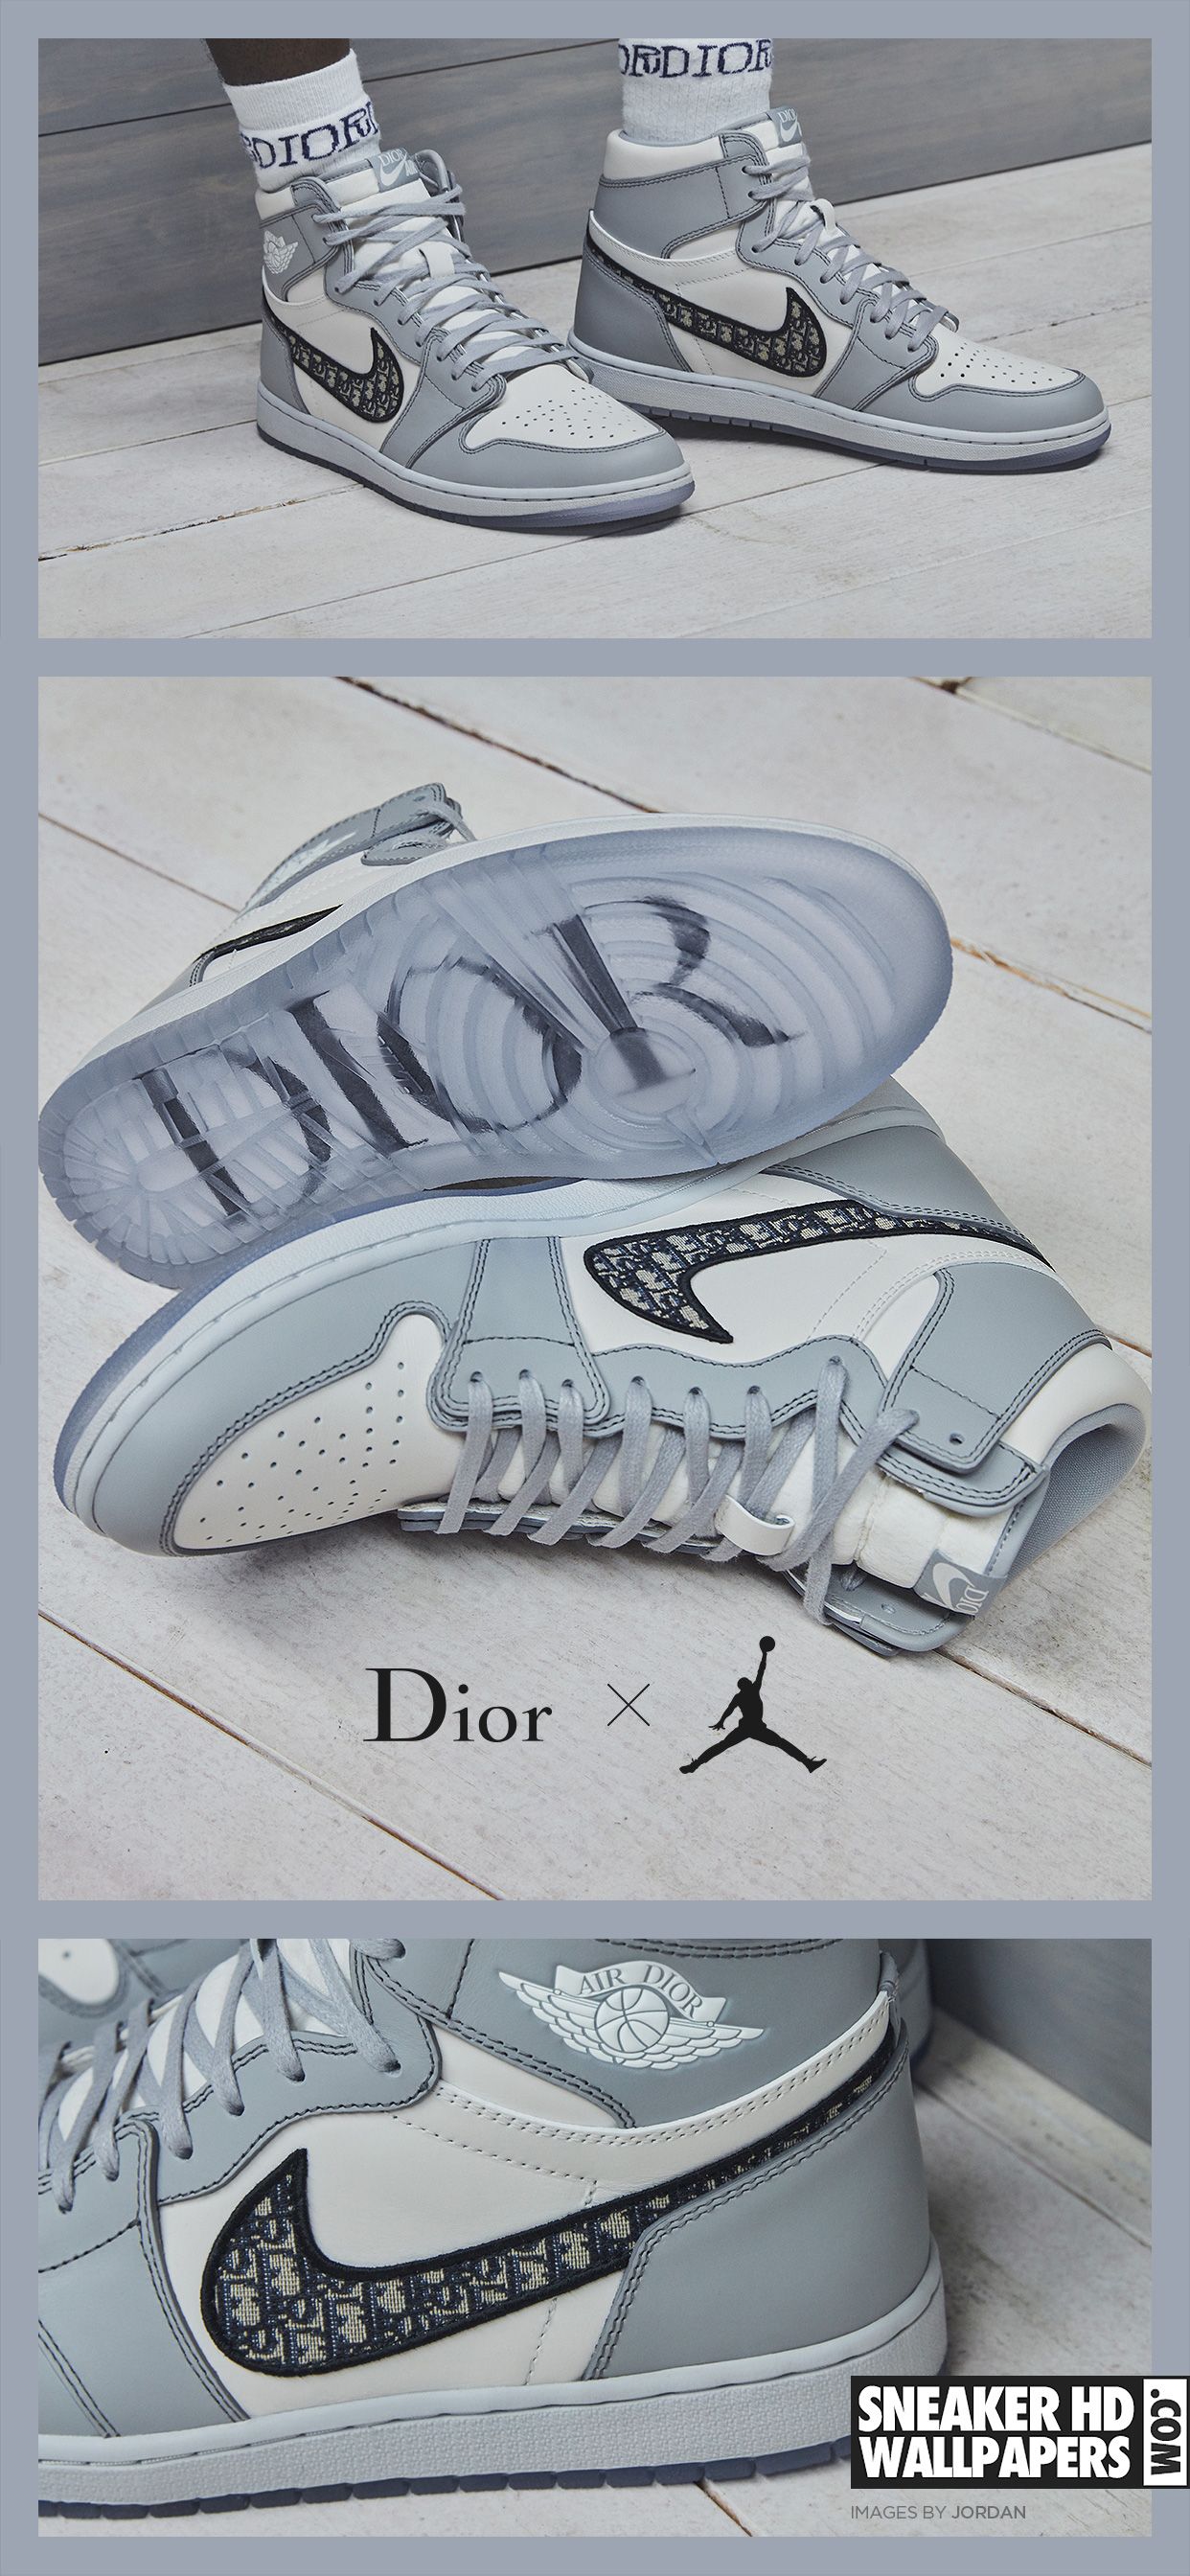 A pair of shoes with the word dior on them - Dior